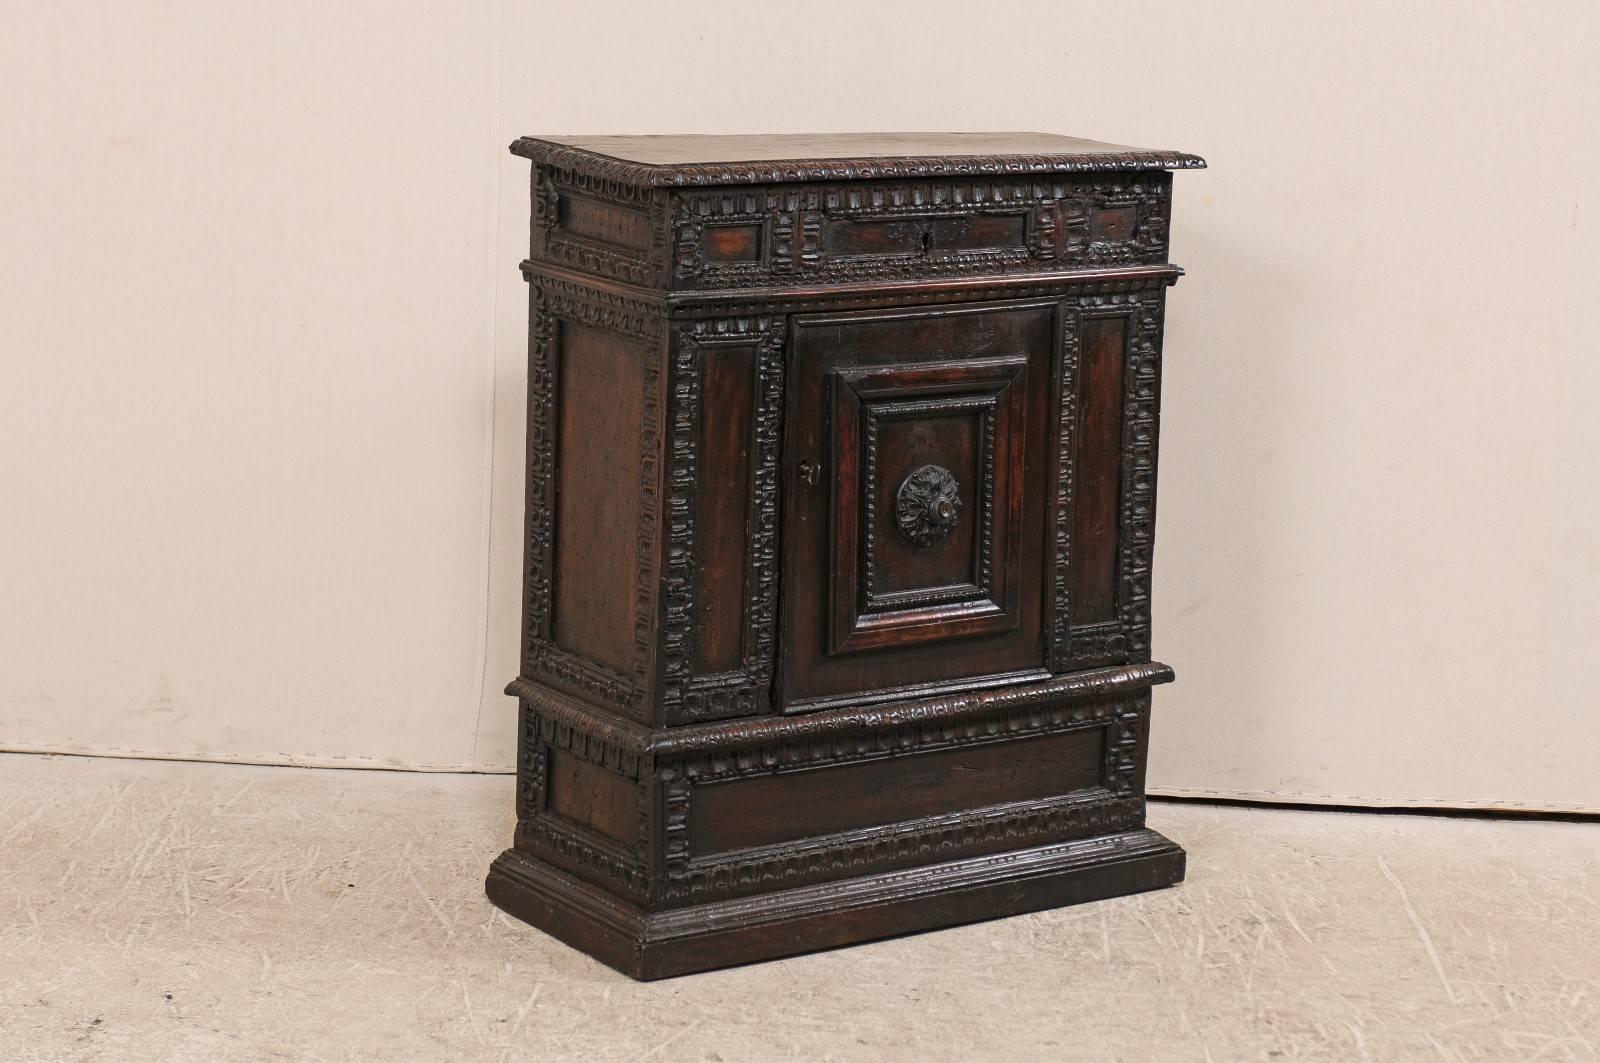 An Italian early 18th century small sized cabinet. This exquisite Italian cabinet, trimmed in richly carved moldings throughout, features a lift top and single door centered at it's lower base which opens to an inner shelf. This wood carved cabinet